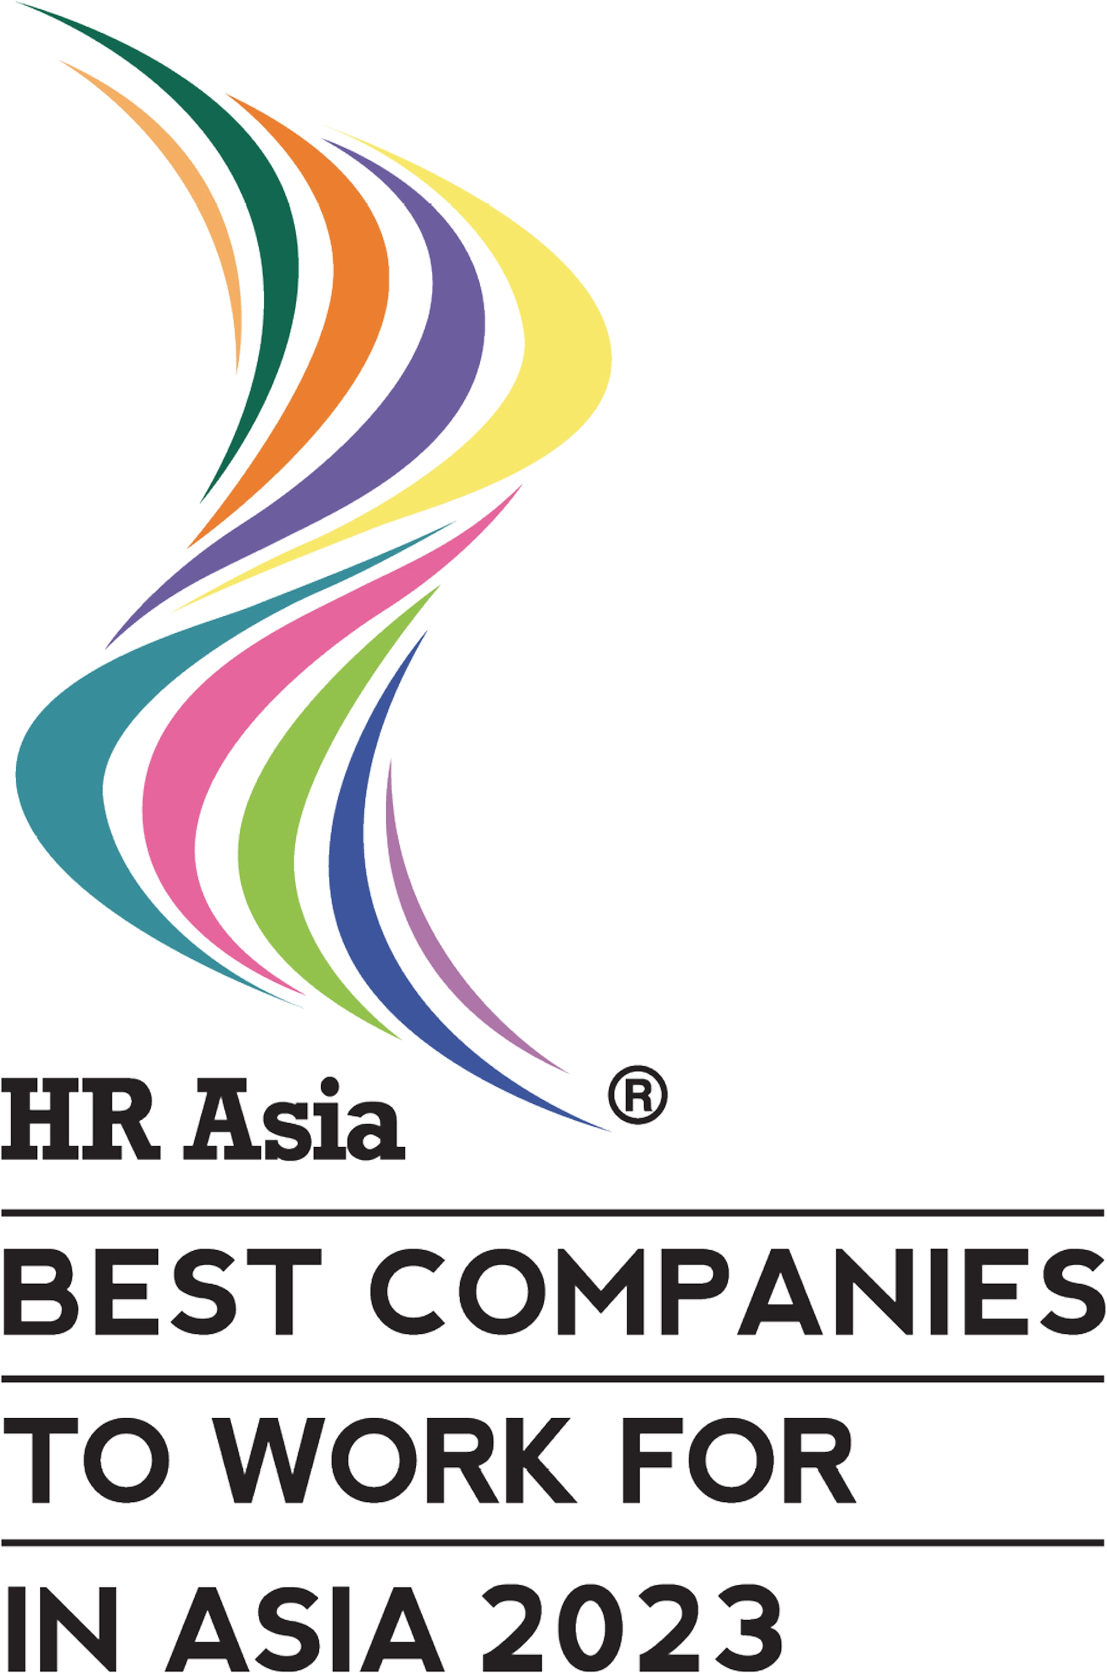 HR Asia Best Companies to Work for in 2023 thumb